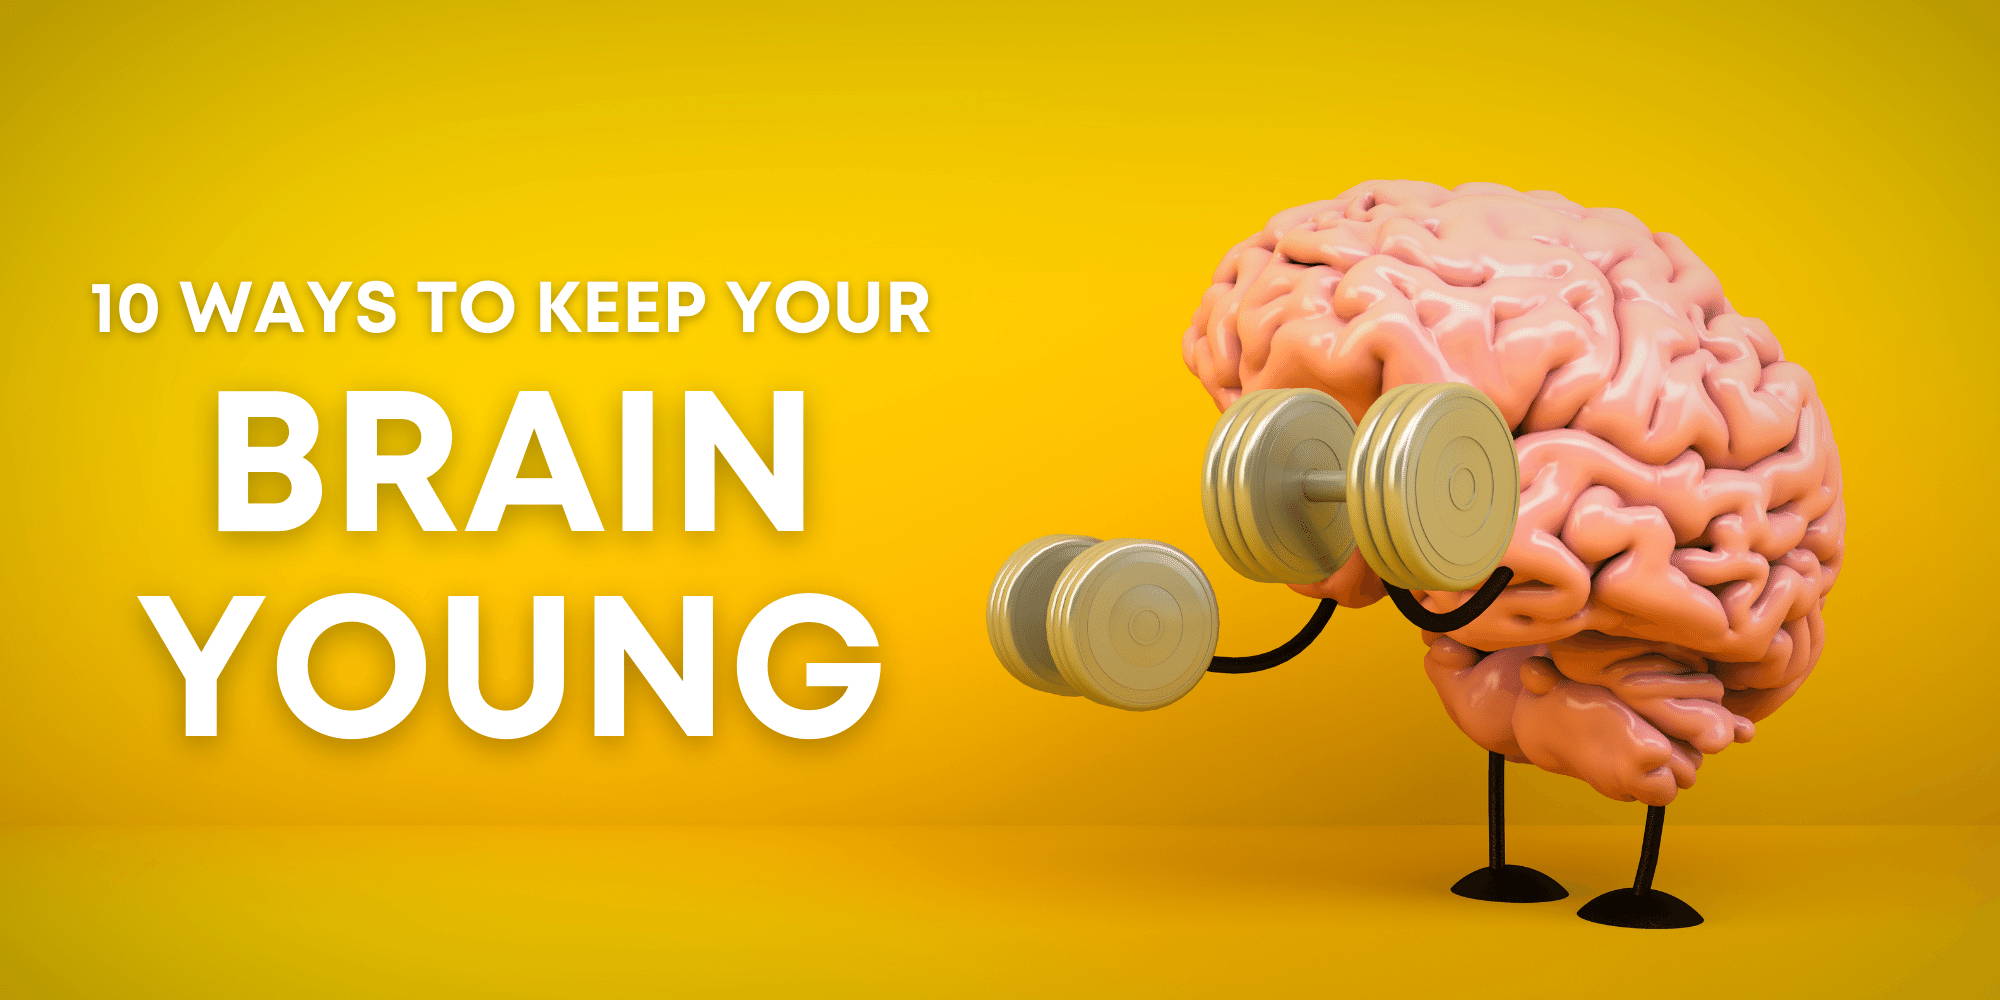 KEEP YOUR BRAIN YOUNG